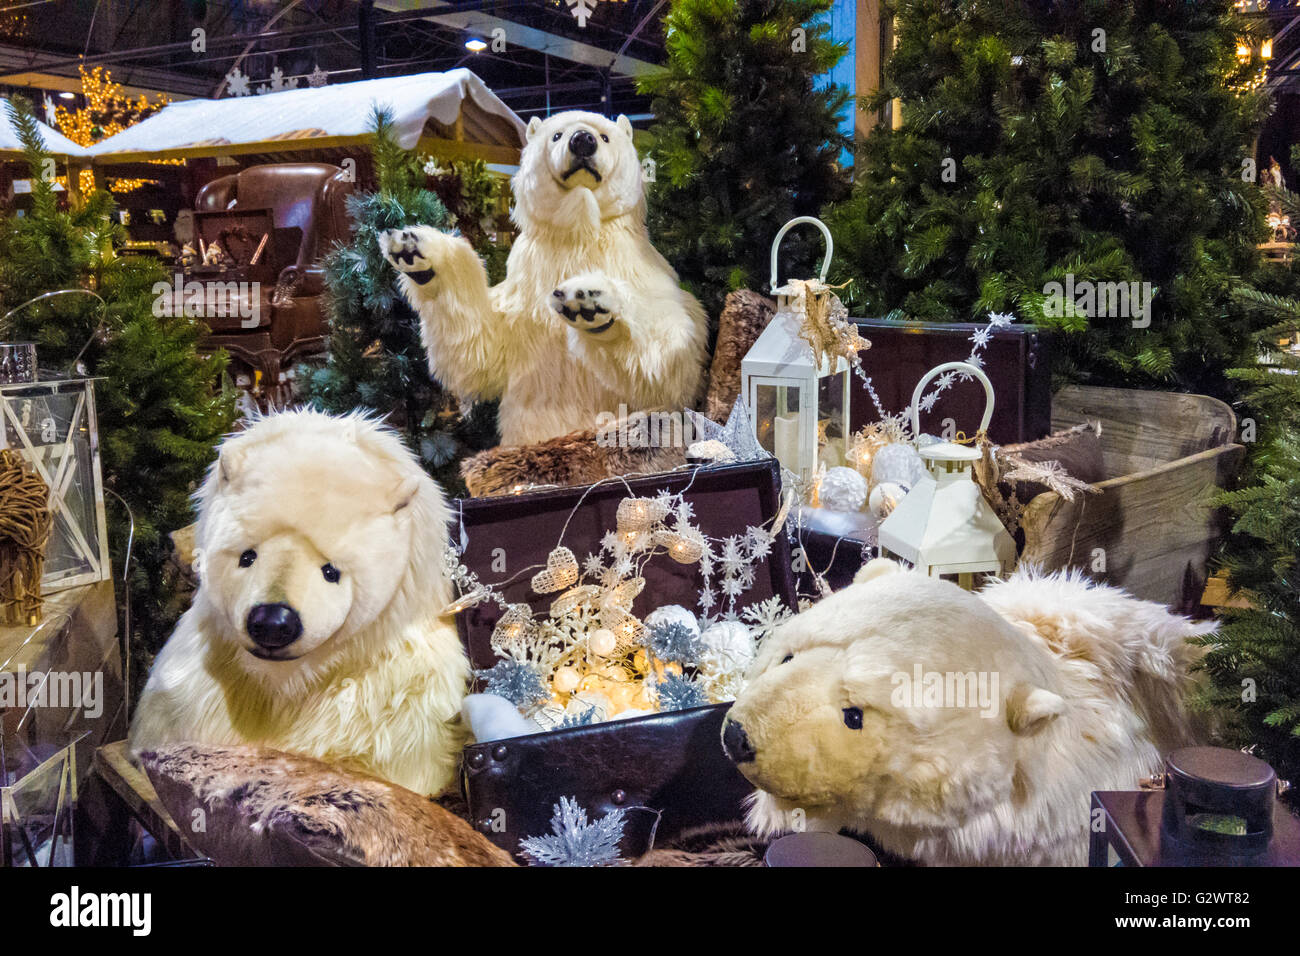 Large Polar Bear cuddly toys on display with Christmwas decorations at a garden centre. Stock Photo